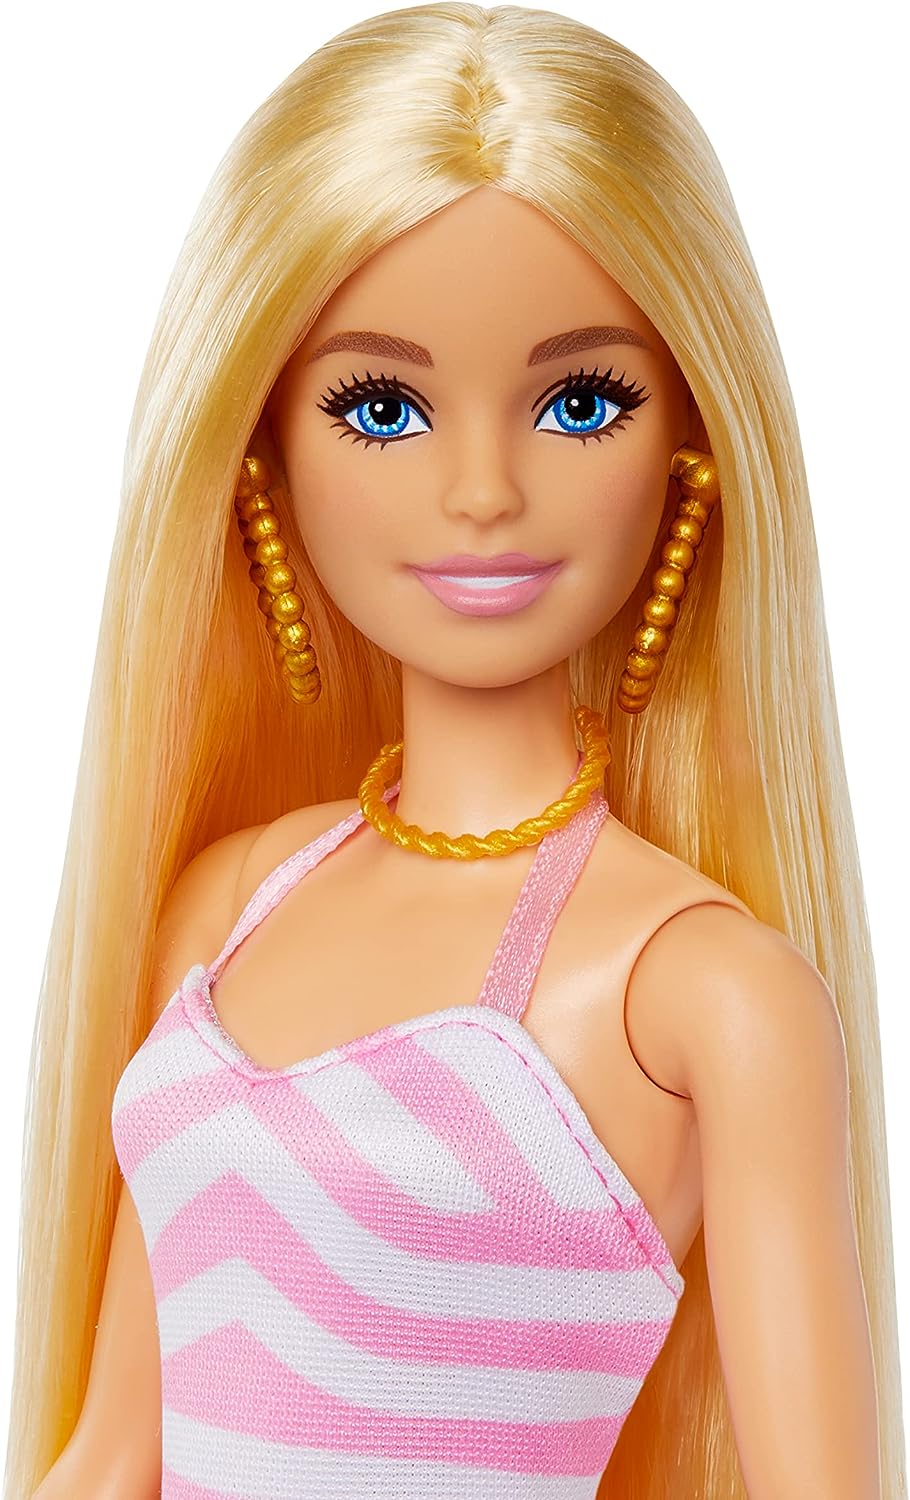 Blonde Barbie Doll with Swimsuit and Beach-Themed Accessories